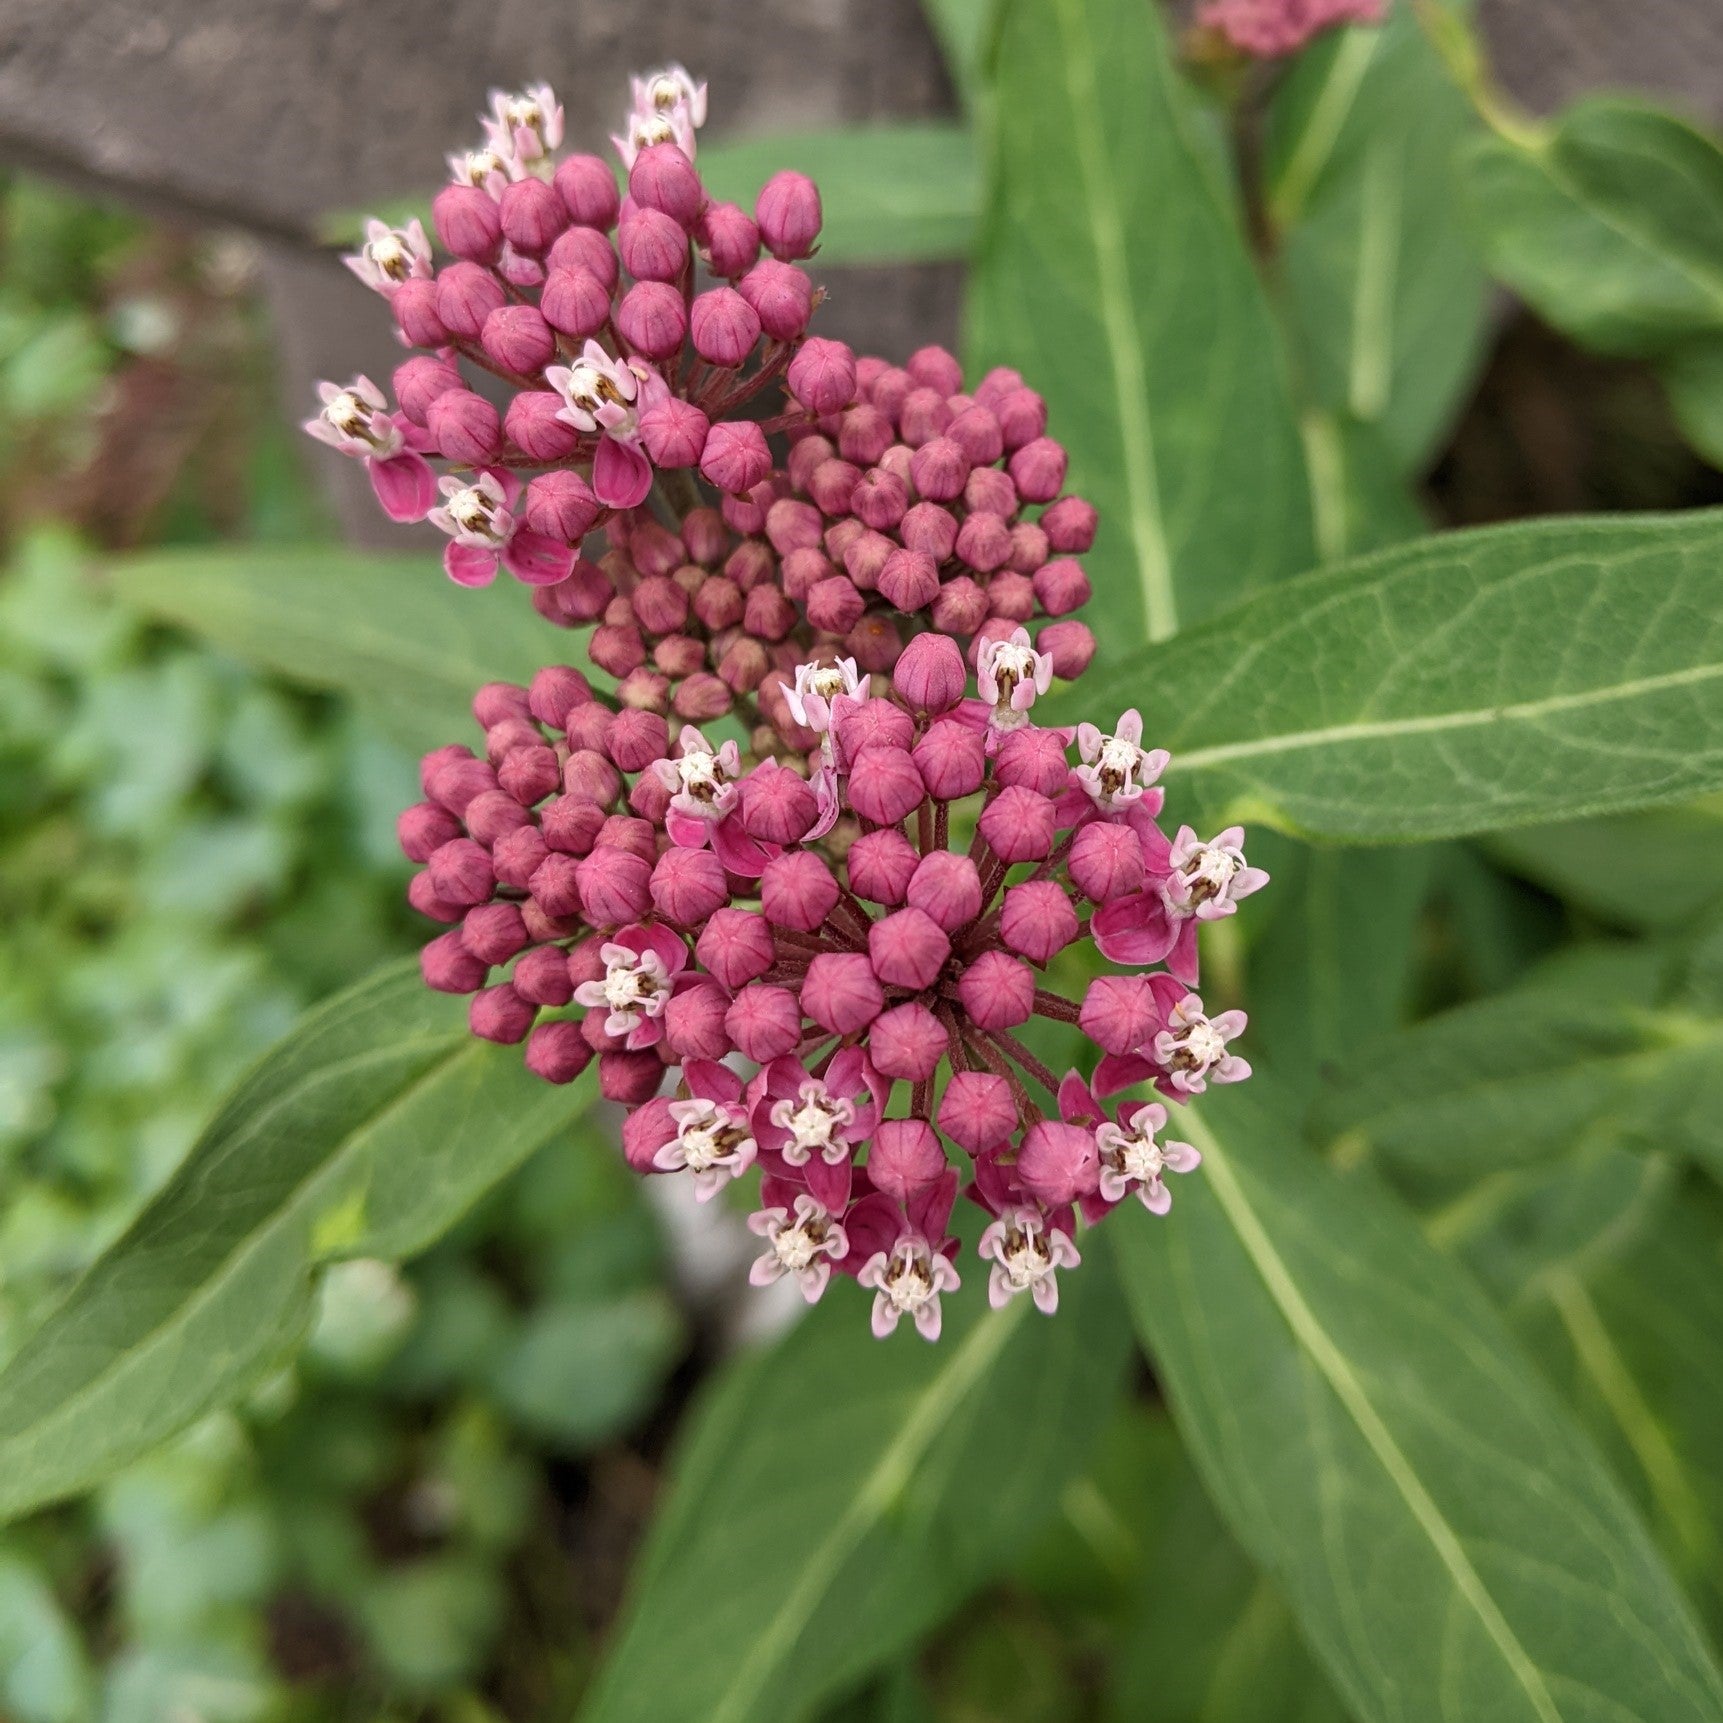 Asclepias incarnata Cinderella Milk Weed Butterfly Weed Image Credit: Chaz Morenz 2022-07-04